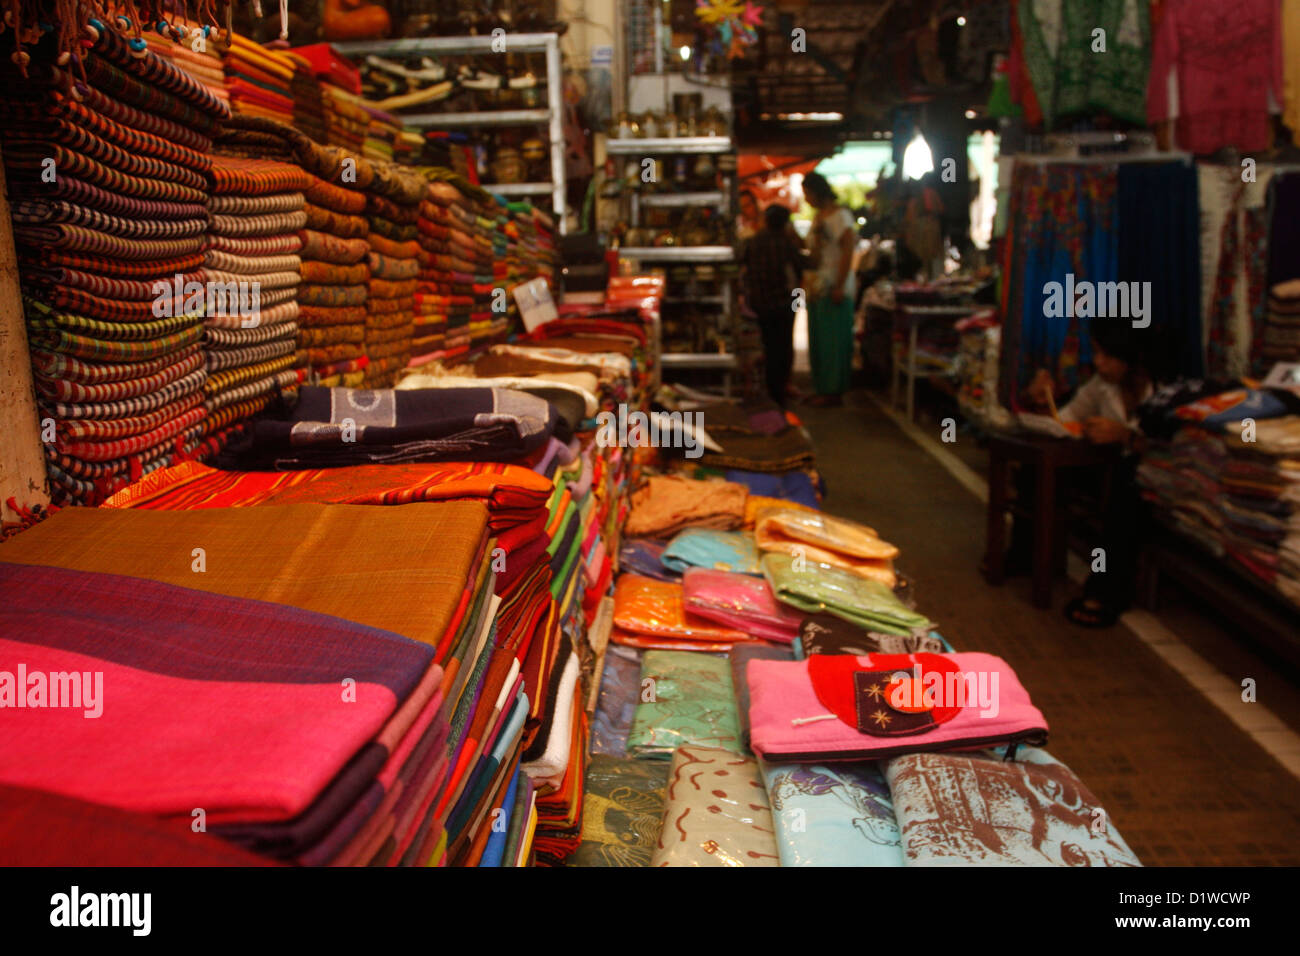 Souvenirs in Old Market, Siem Reap. Stock Photo